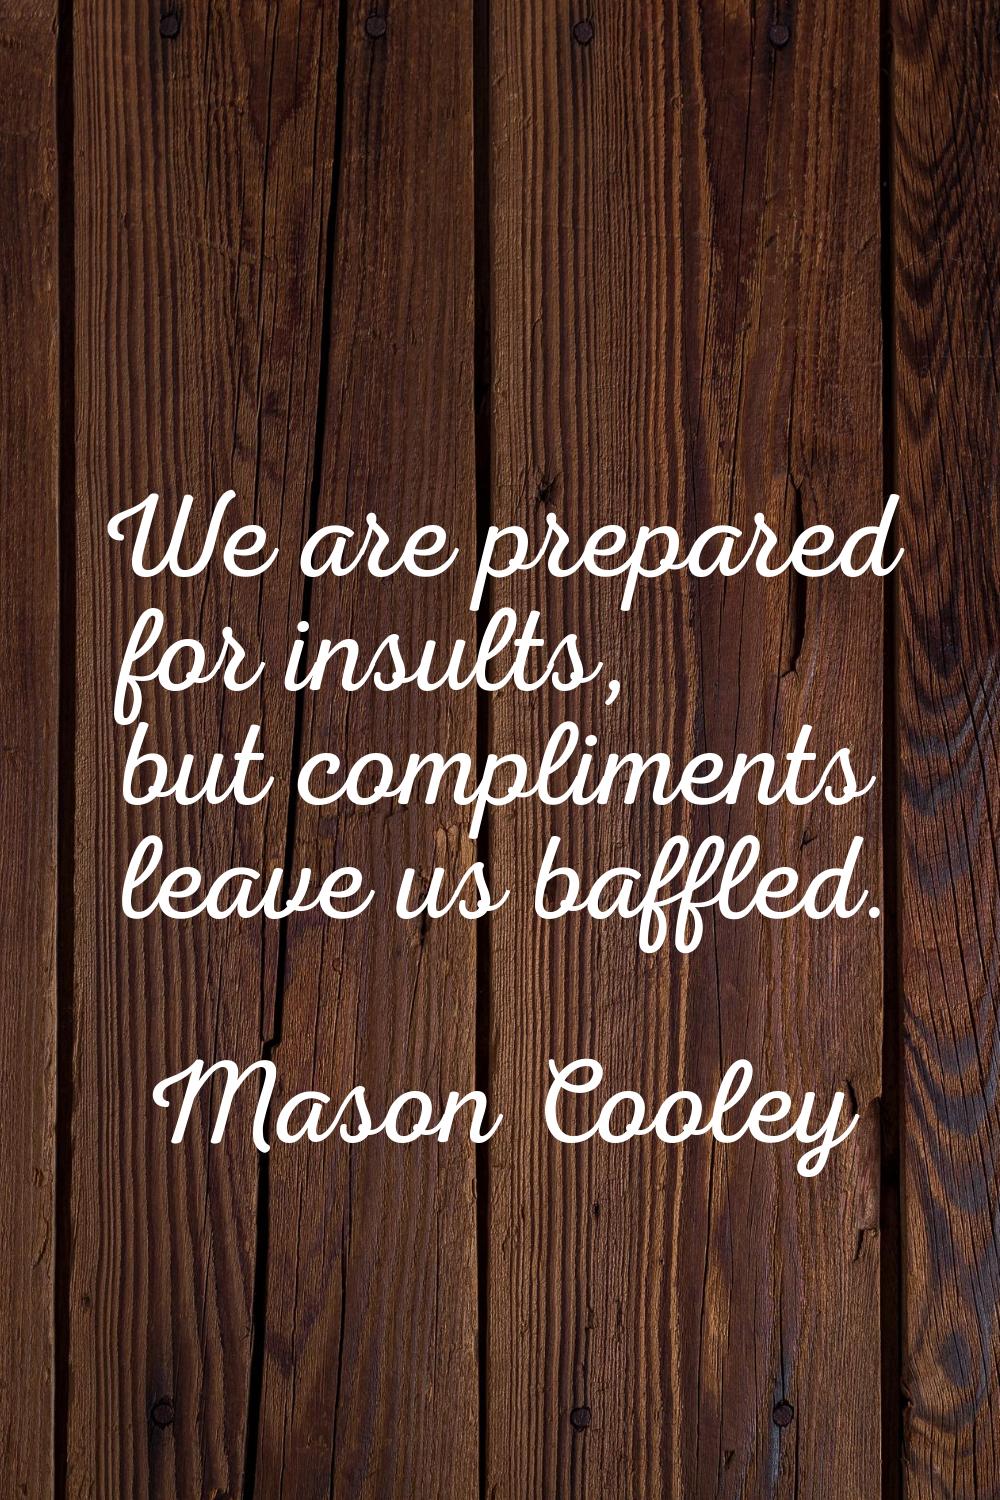 We are prepared for insults, but compliments leave us baffled.